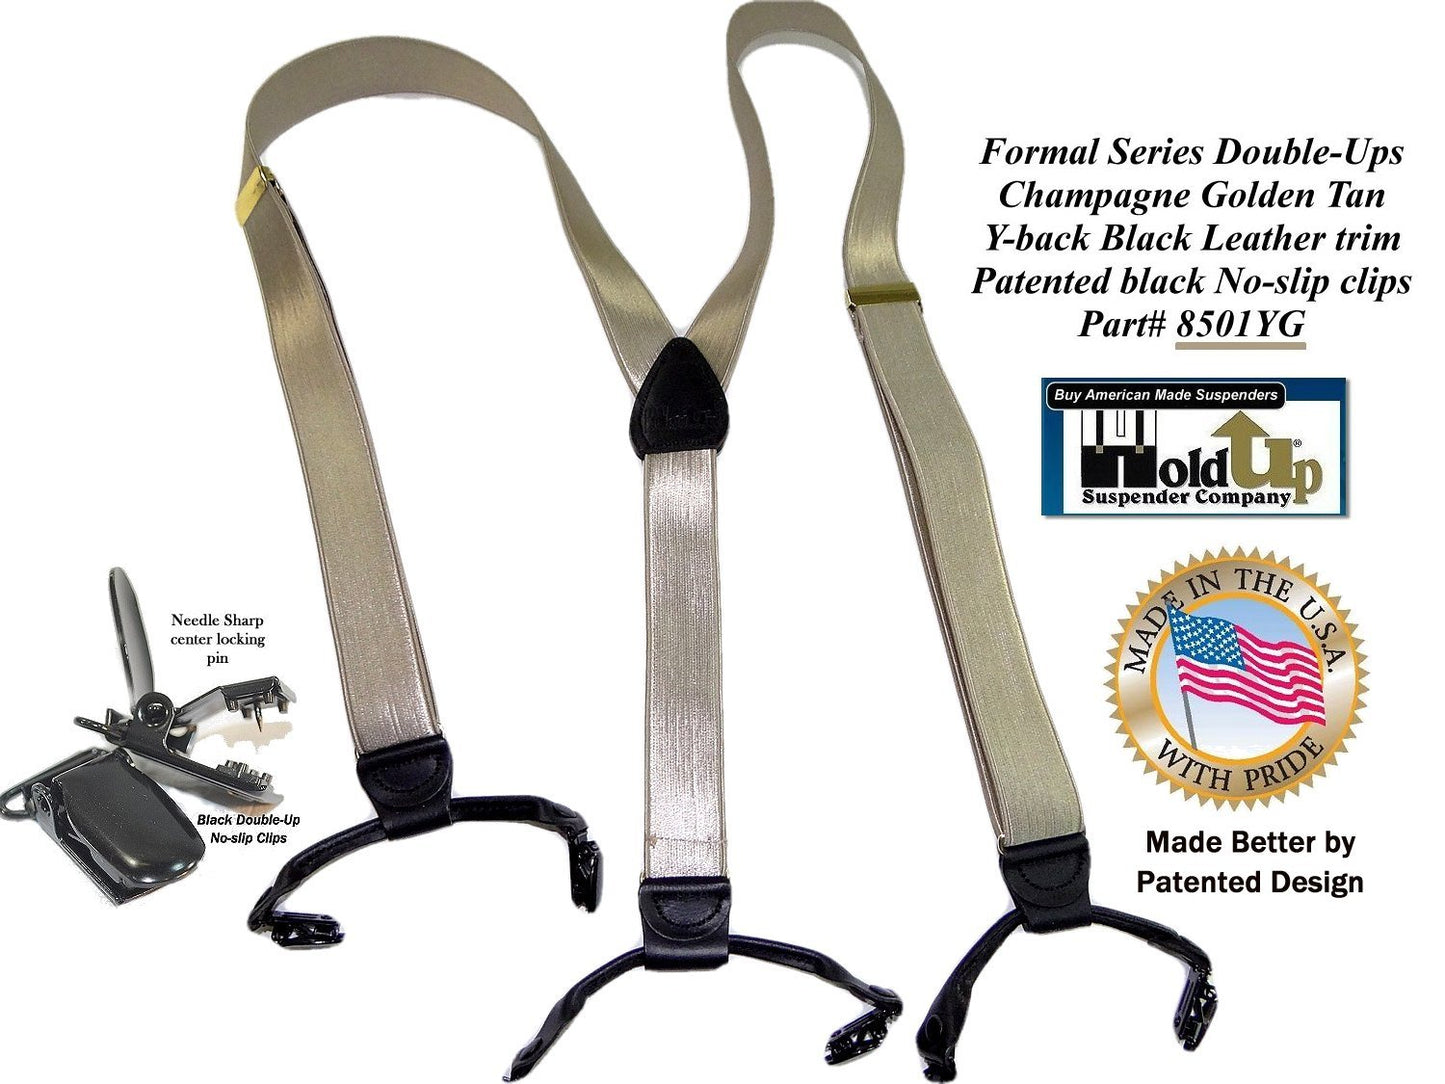 USA Made Holdup Champagne/Tan Satin Fabric Finish, Formal, Double-ups Styled Suspenders